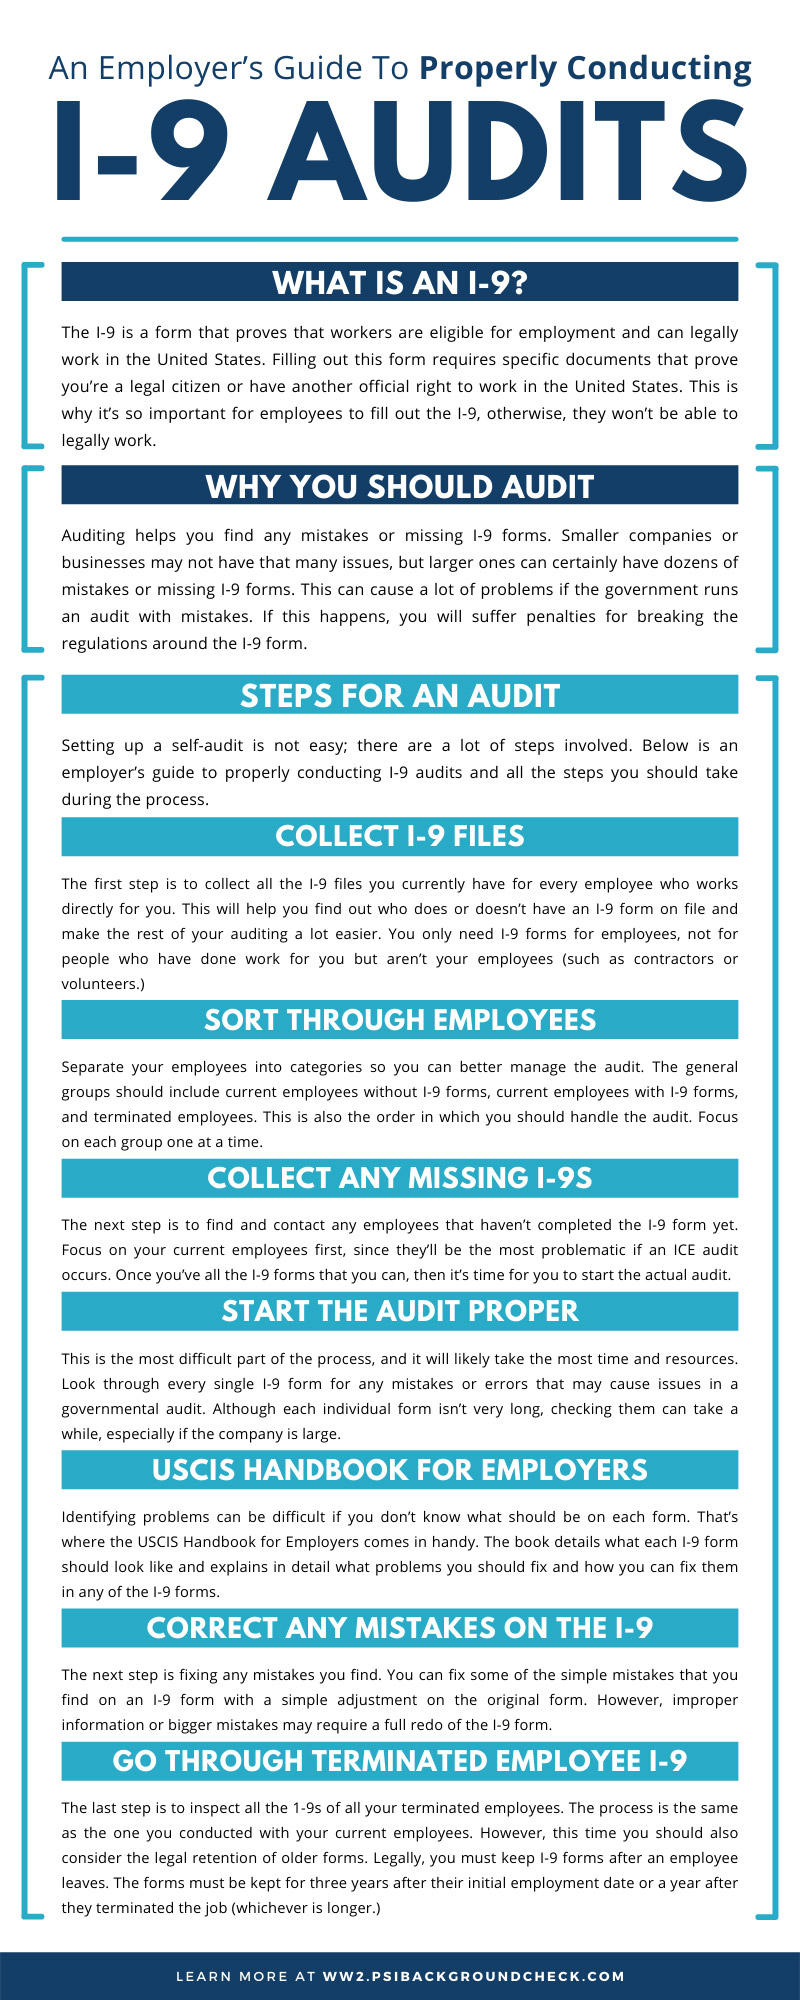 An Employer’s Guide To Properly Conducting I-9 Audits